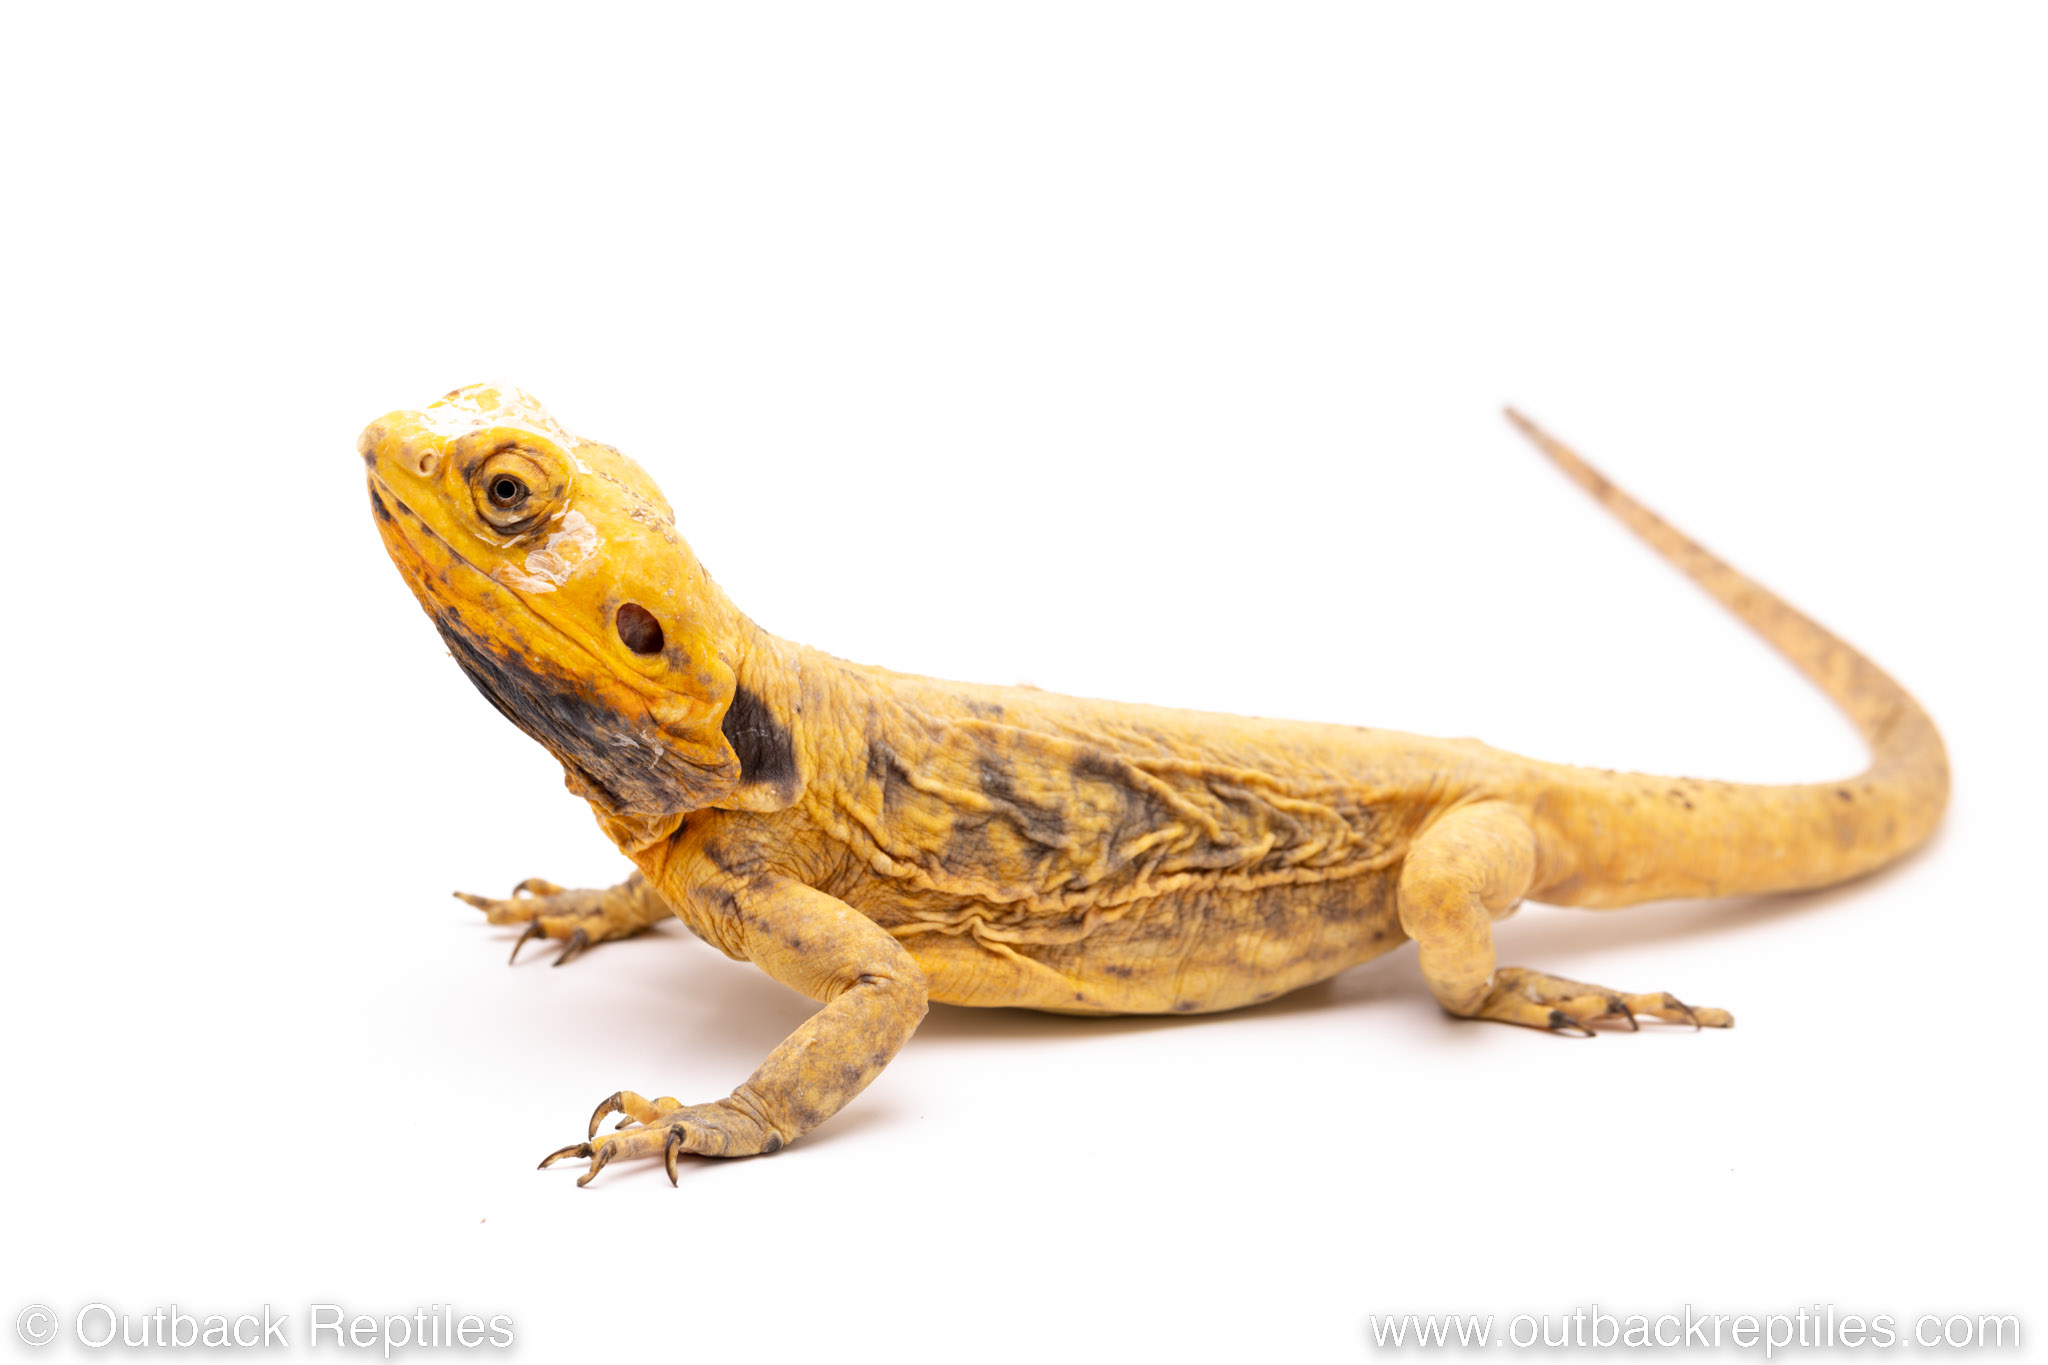 Silkback Bearded Dragon – Male for sale | Outback Reptiles